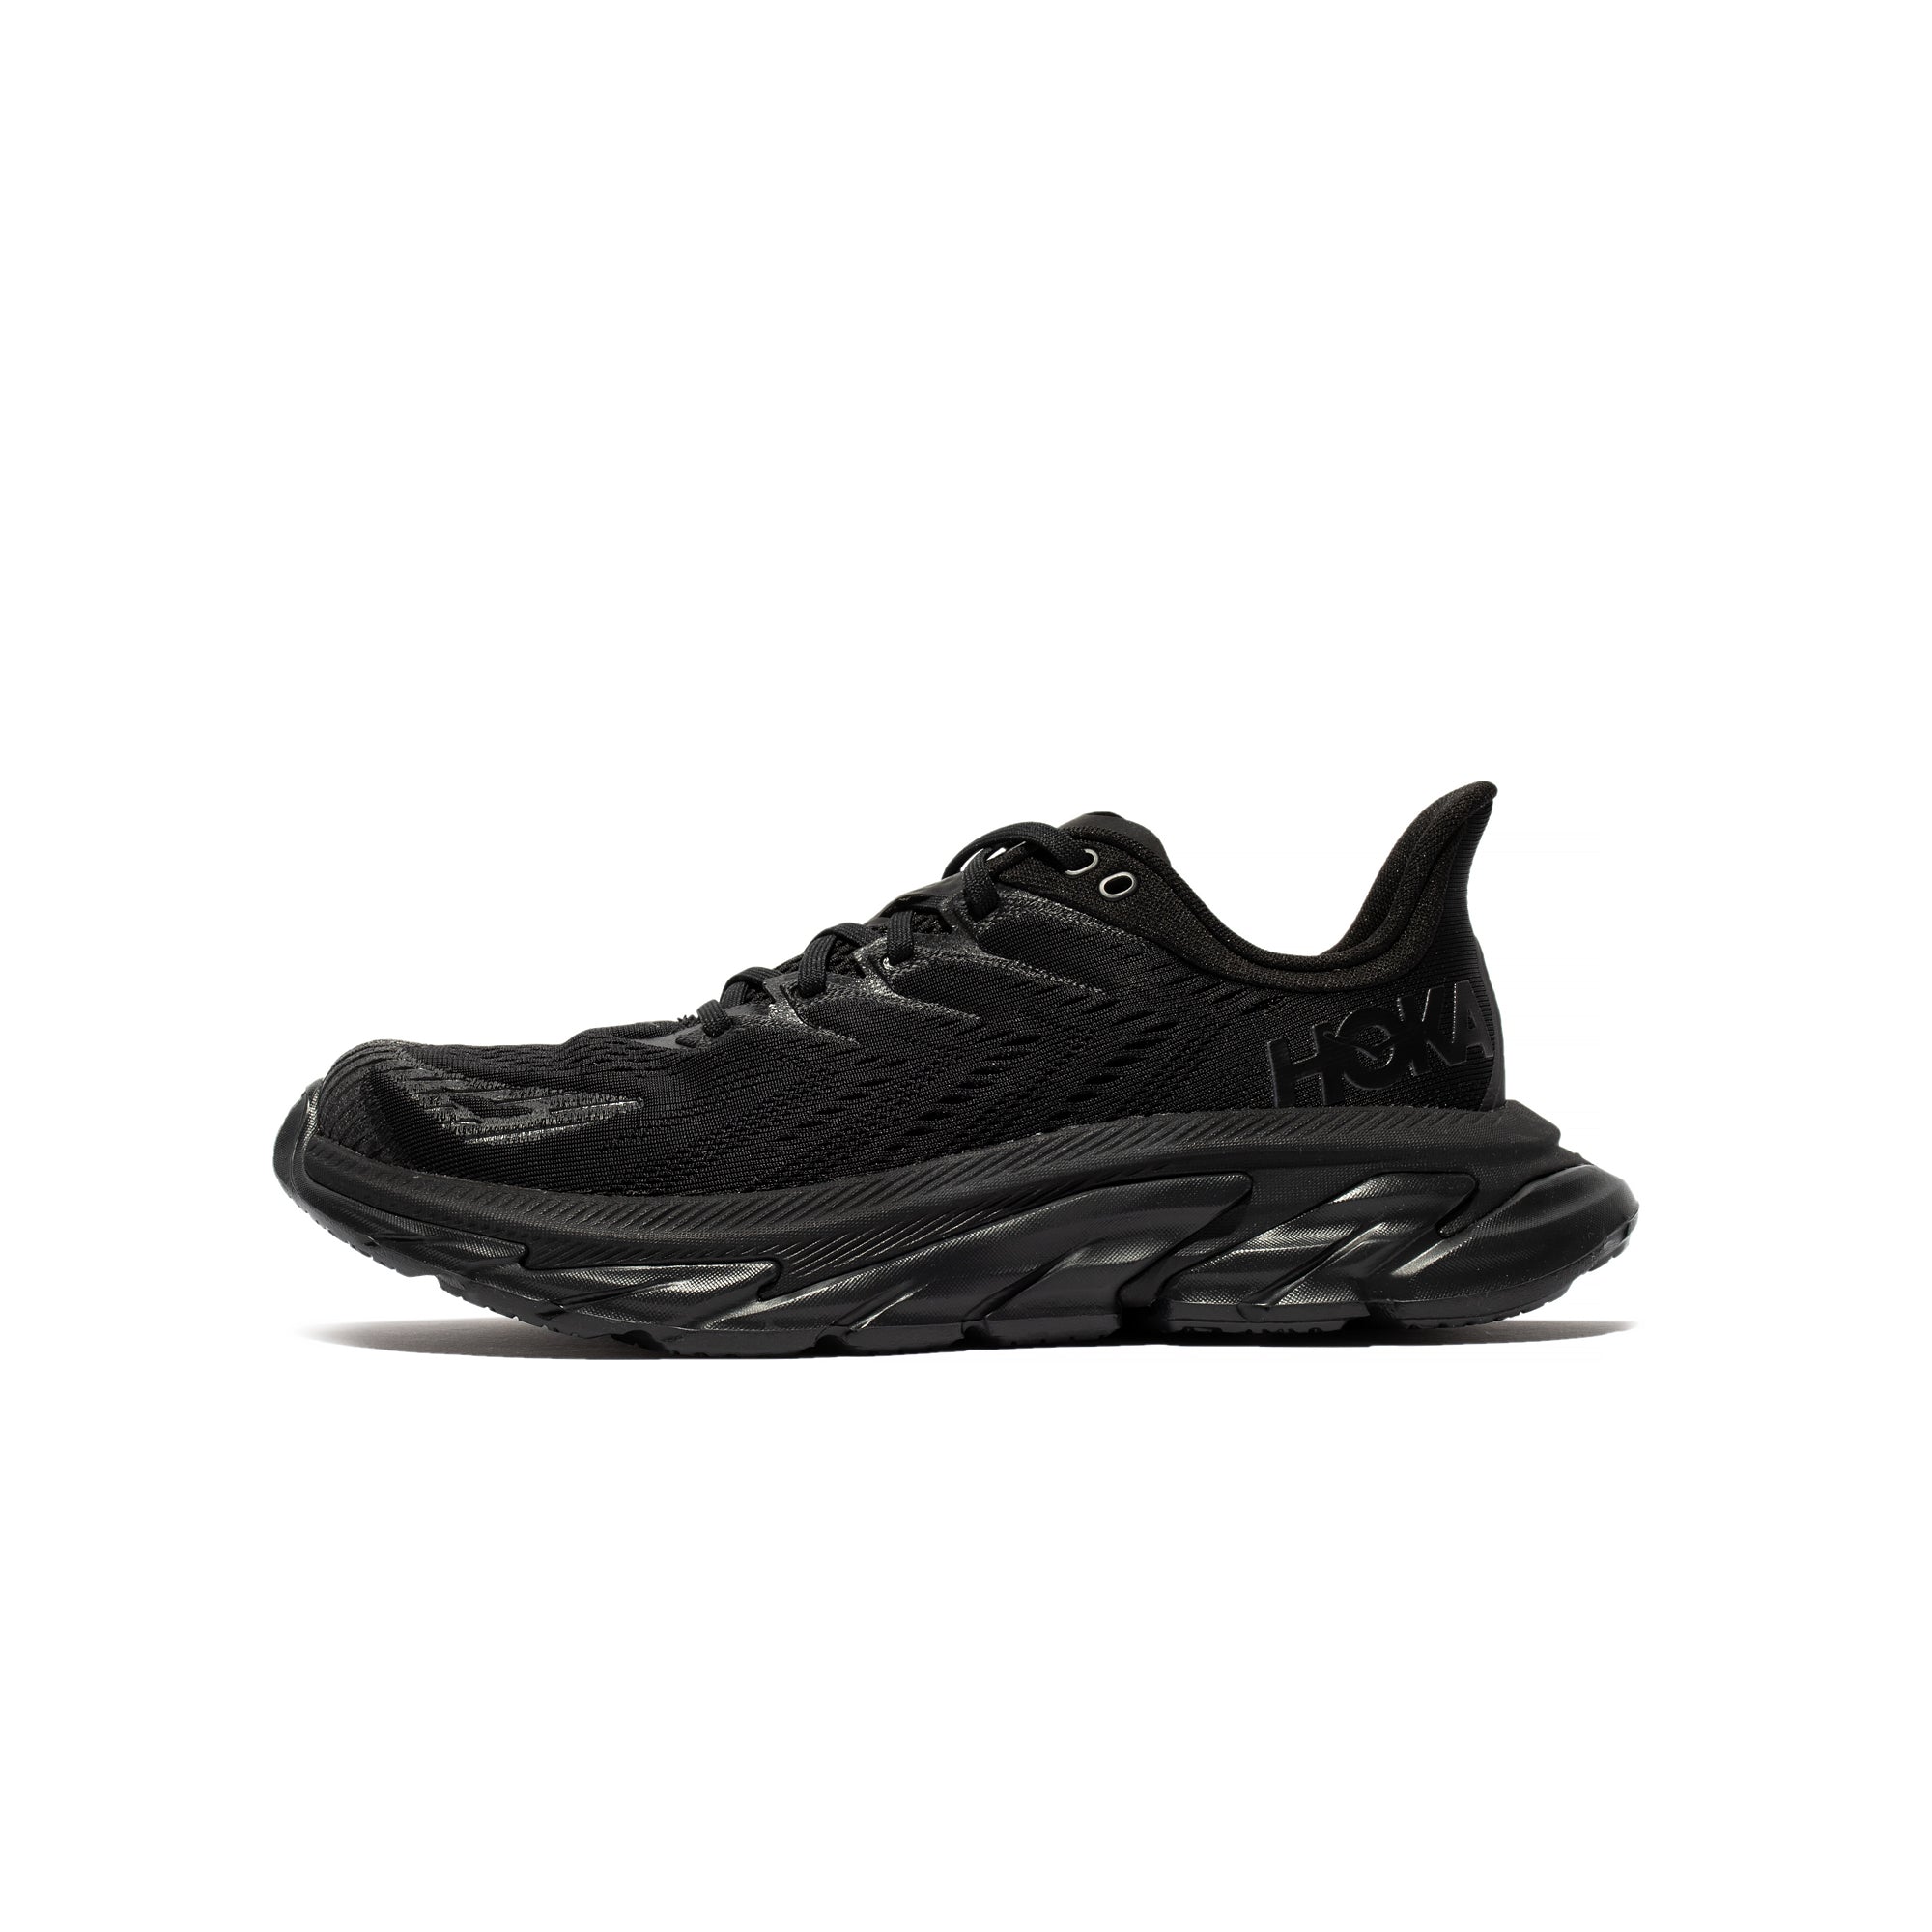 Hoka One One Clifton Edge Shoes 'Black' – Extra Butter